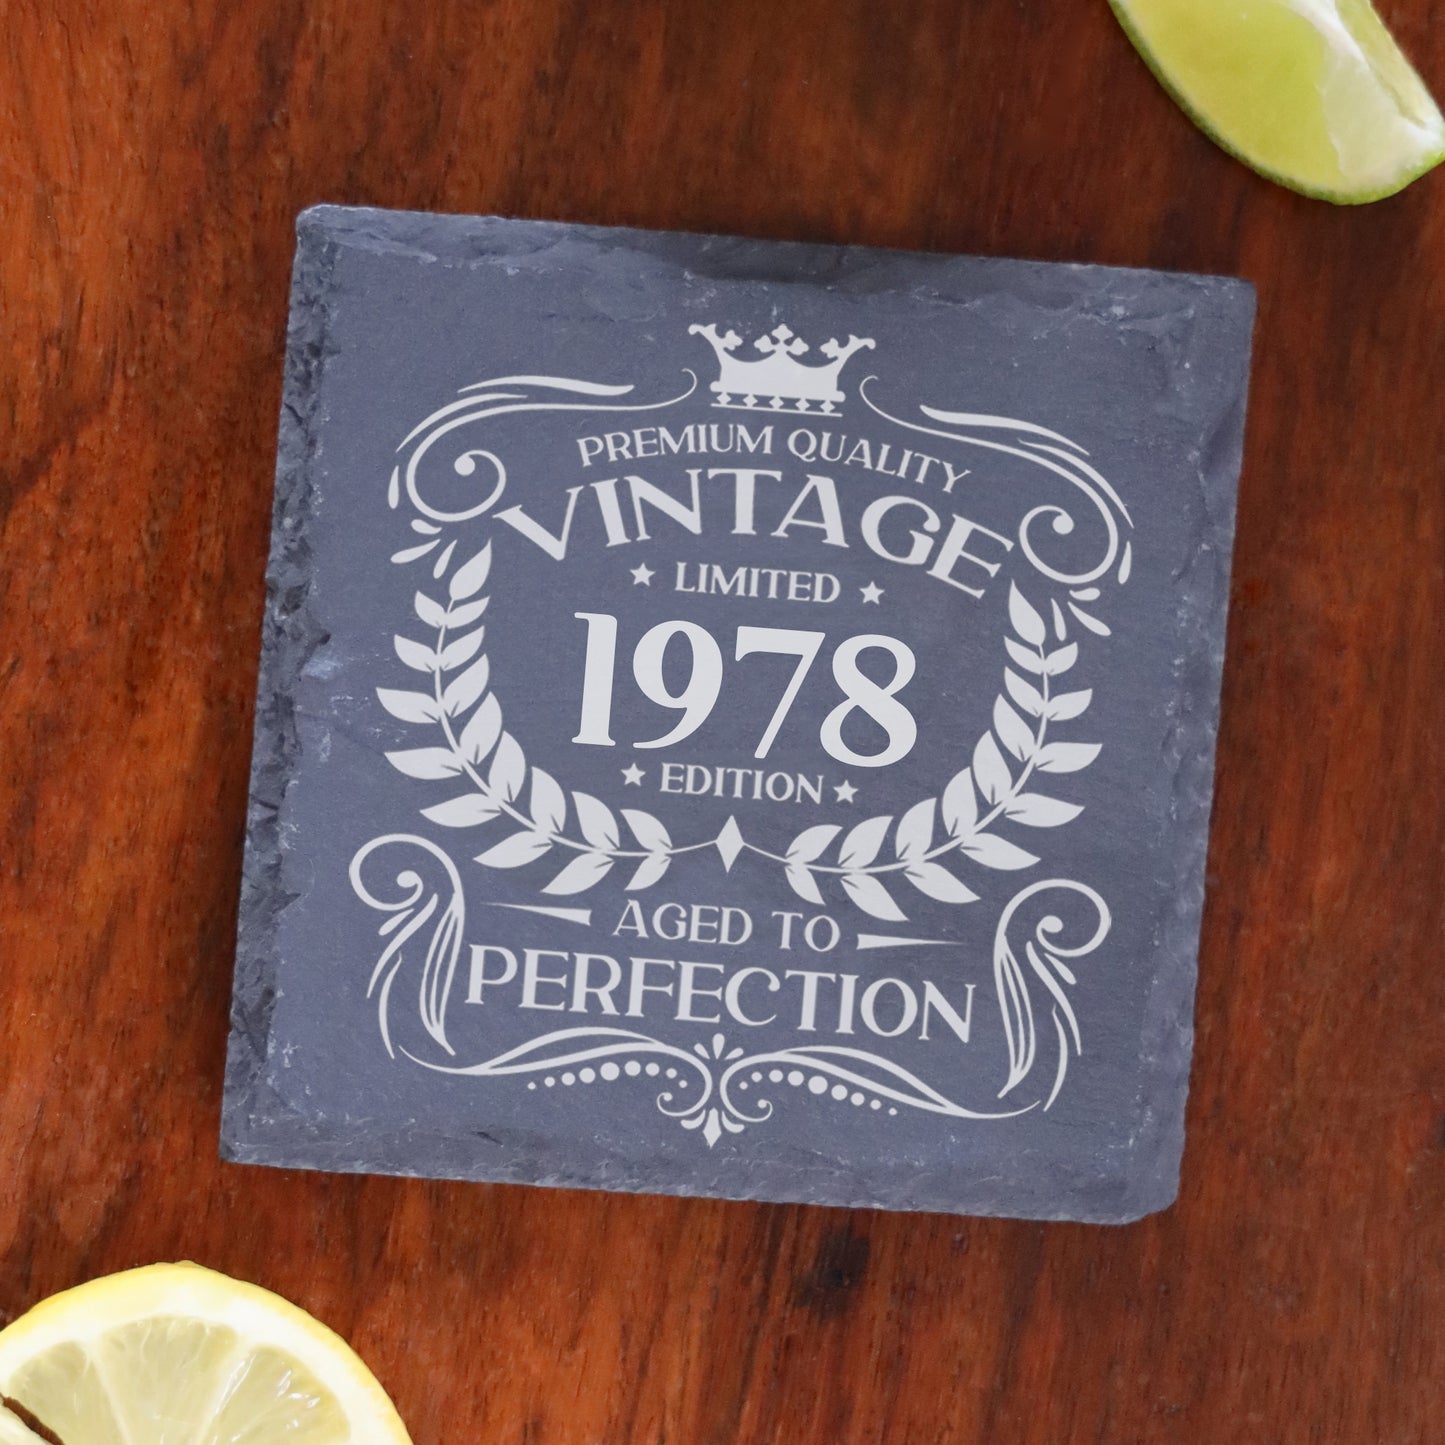 Personalised Vintage 1978 Mug and/or Coaster  - Always Looking Good - Square Coaster On Its Own  